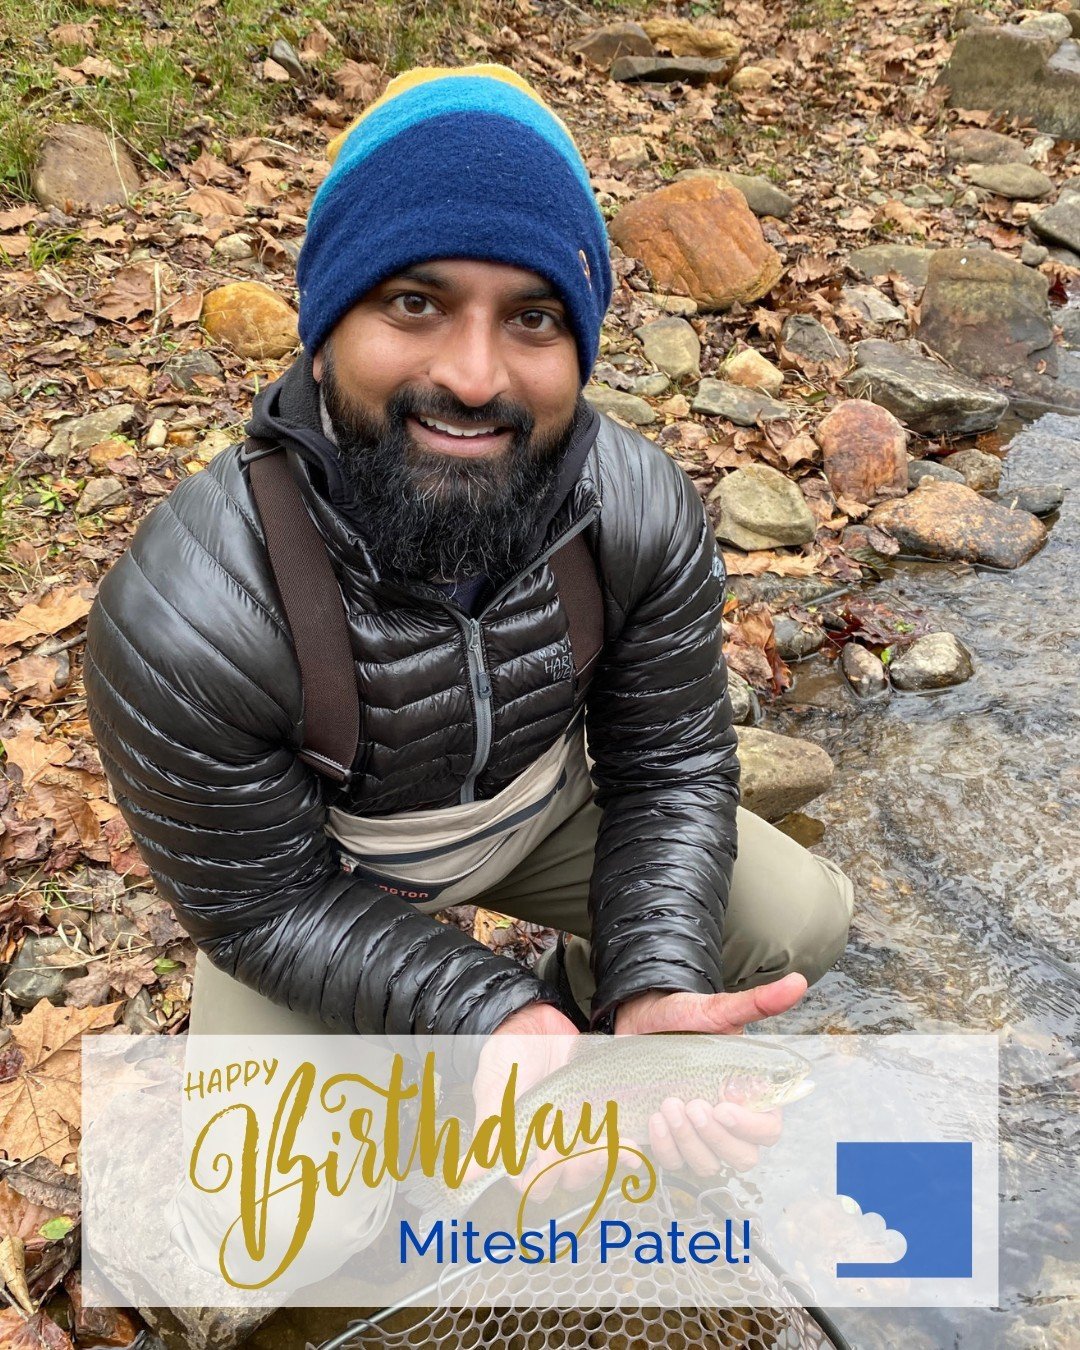 Happy Birthday to Blue Sky Law Principal Partner, Mitesh Patel! Wishing you a birthday weekend filled with friends, family, and cheer! 🍷🥂🎂